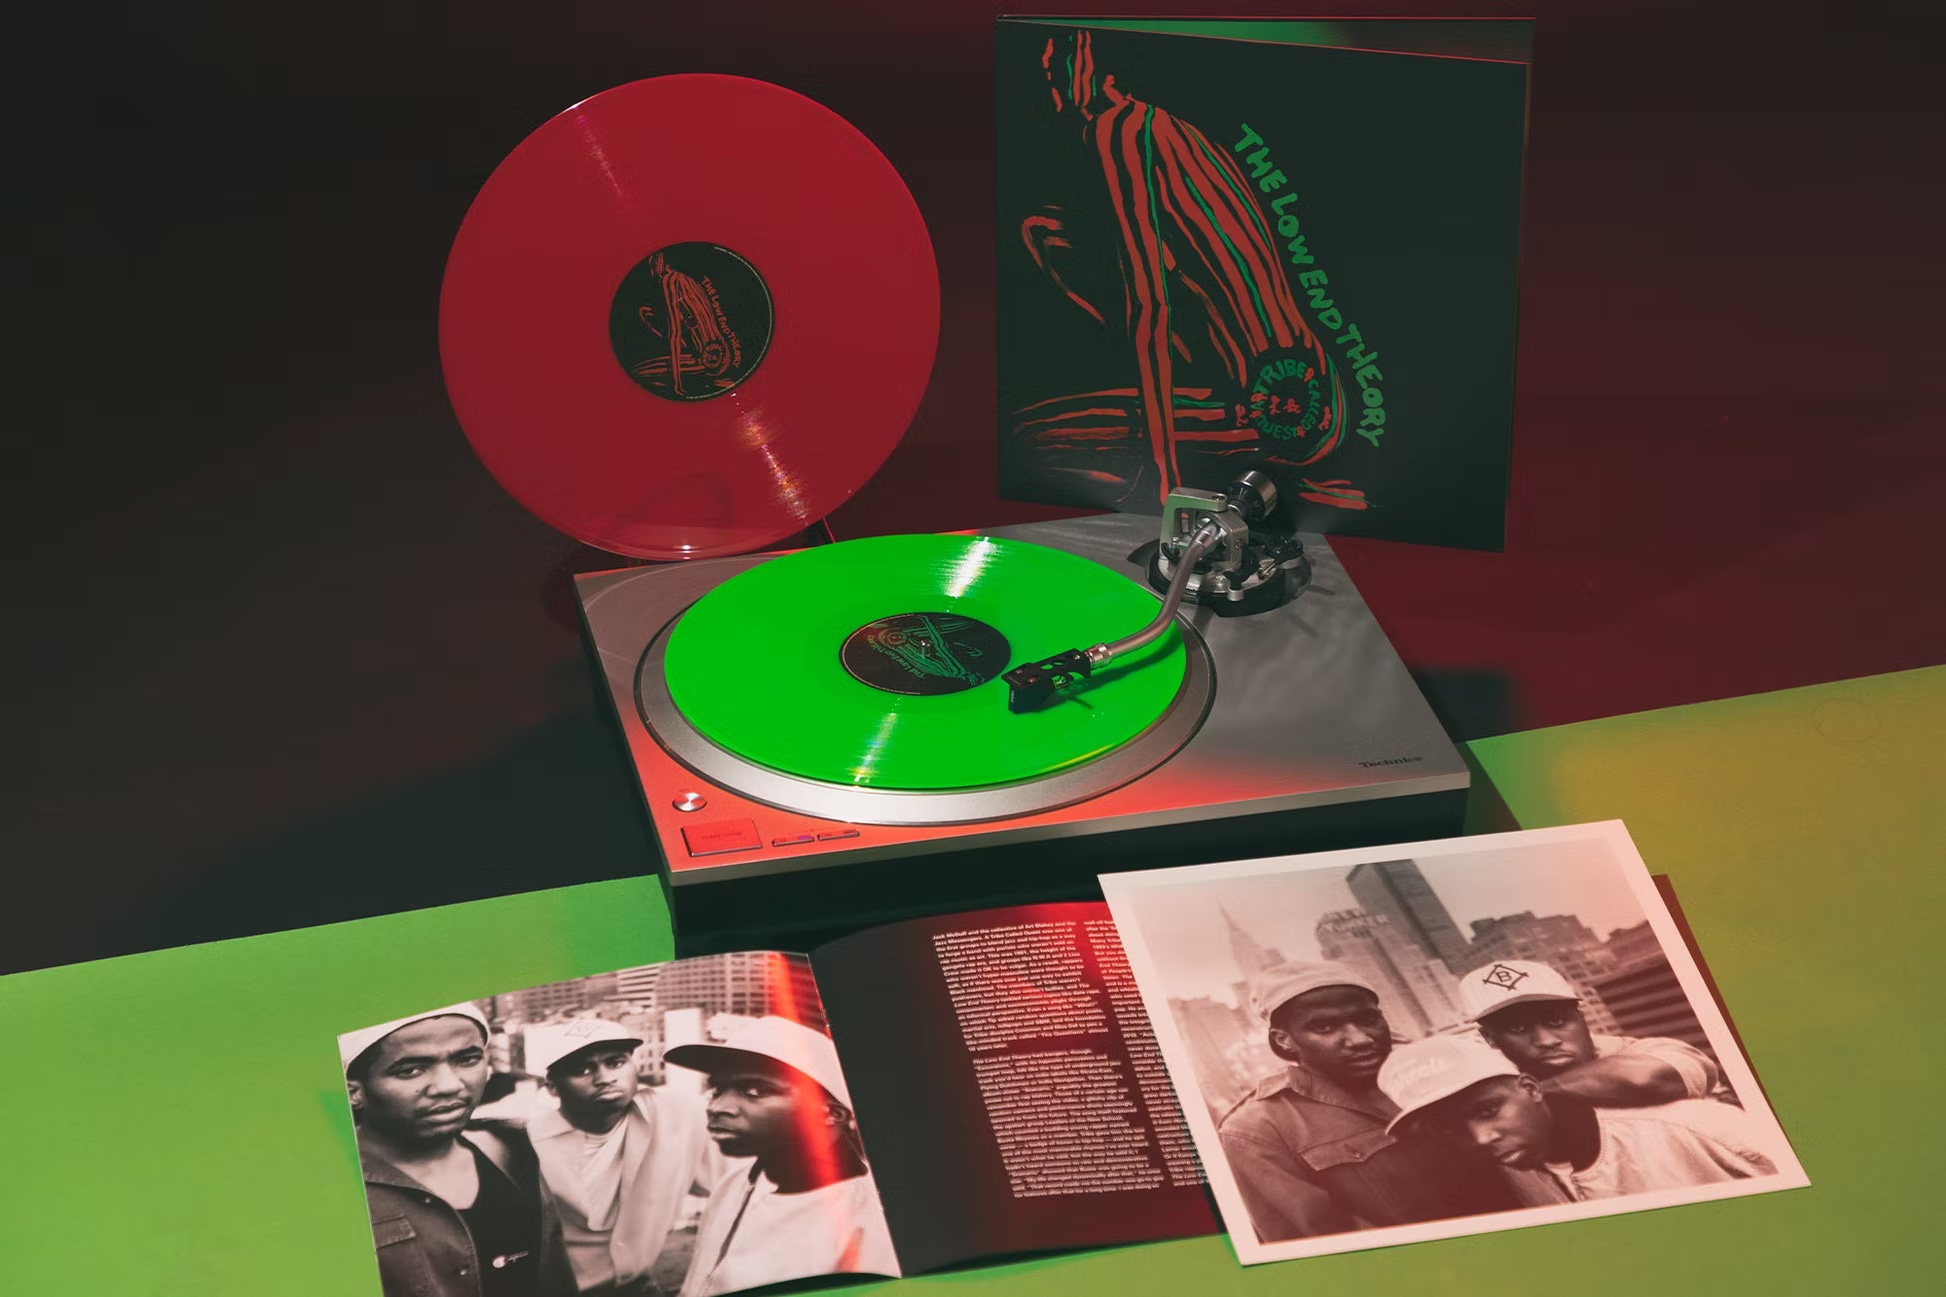 Tribe Called Quest Low End Theory VMP reissue